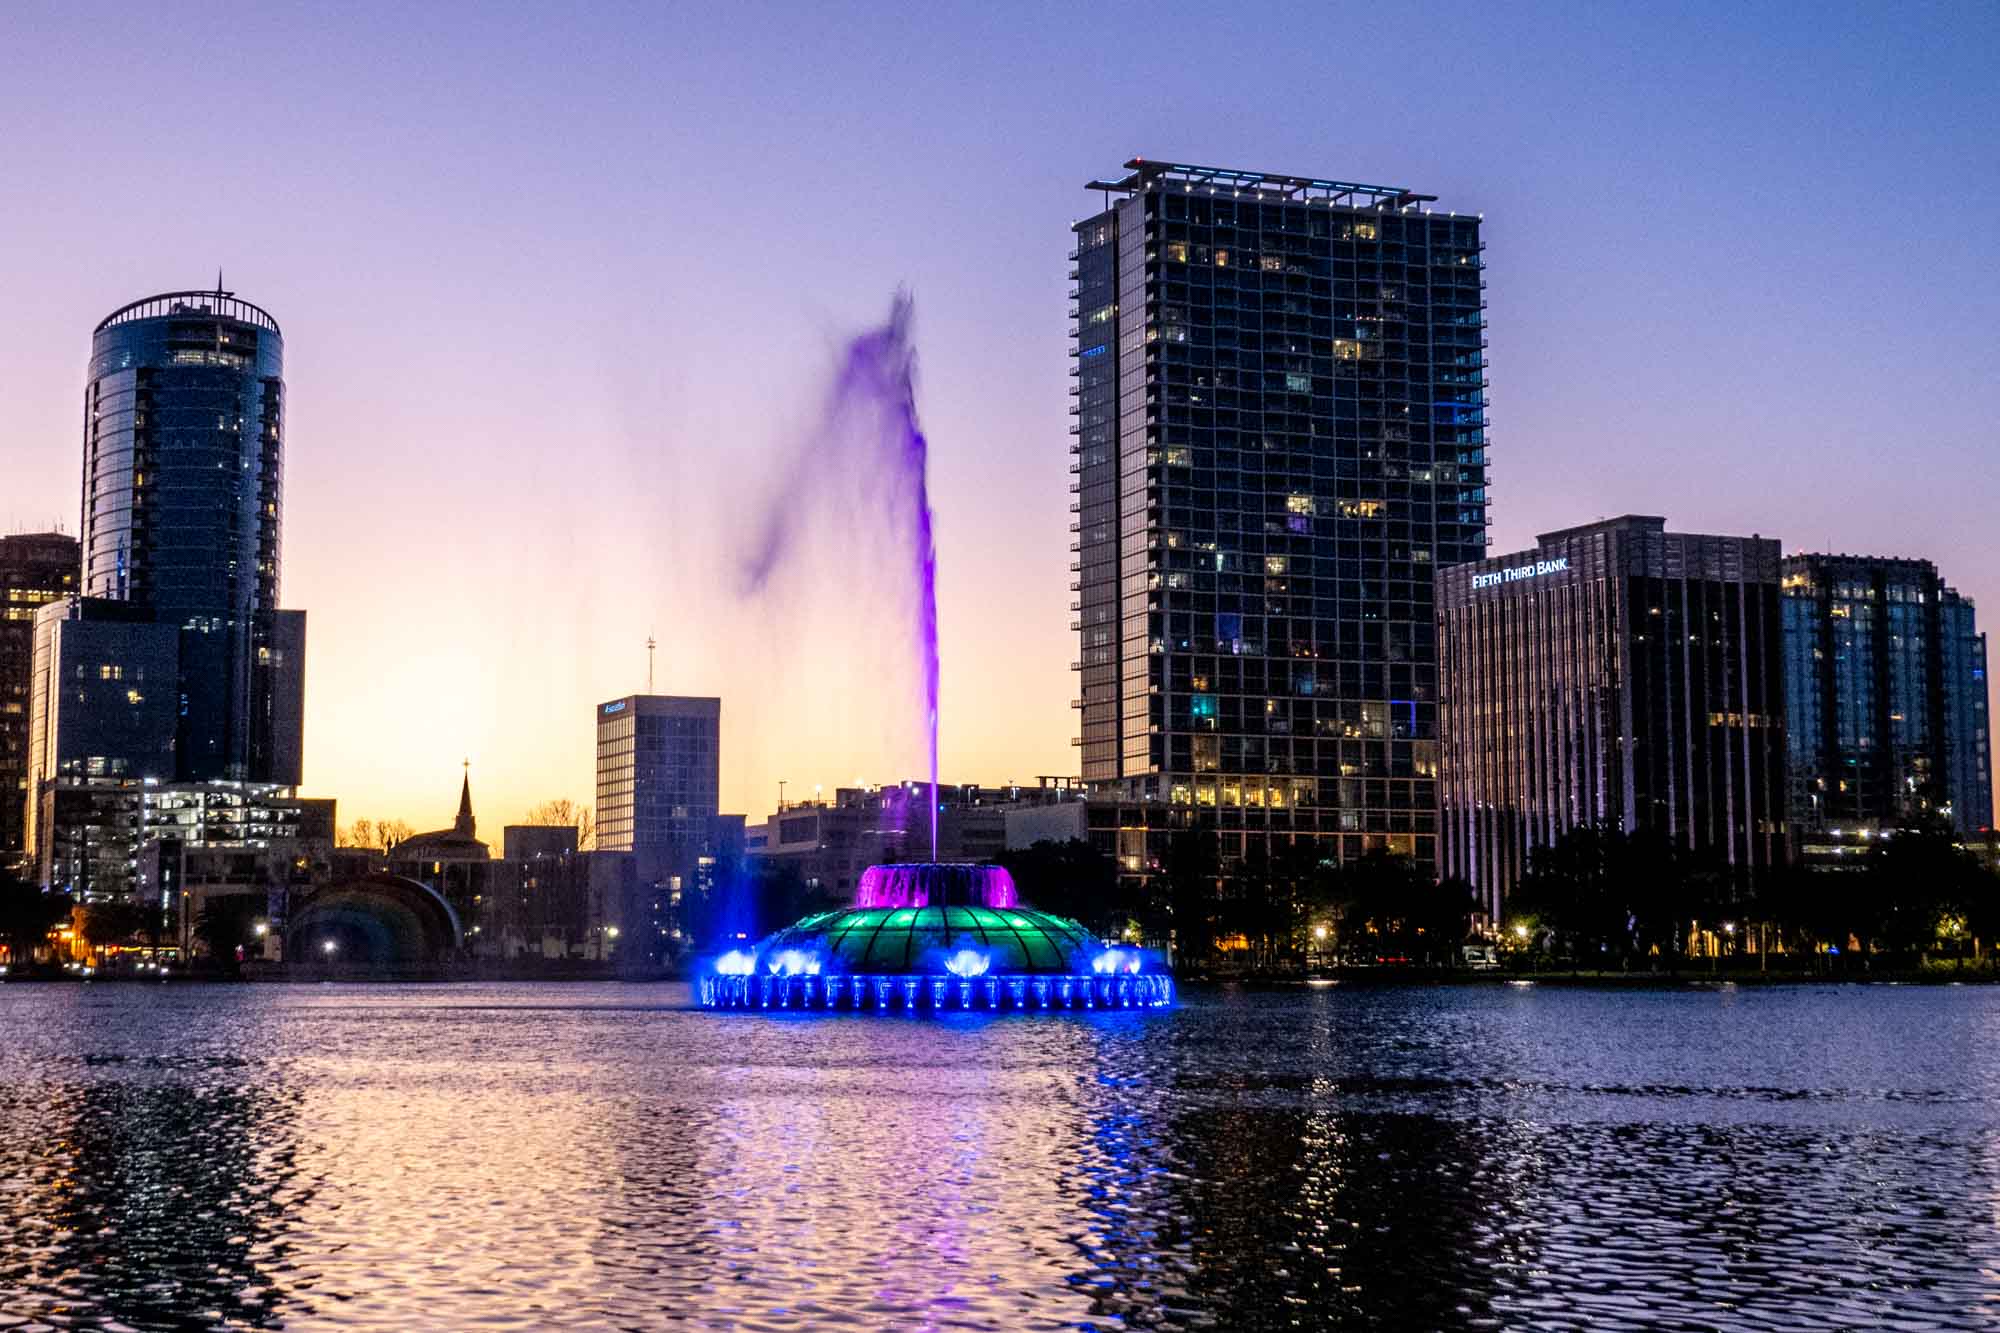 Fountain lit up in bright colors in the middle of a lake with skyscrapers in the background